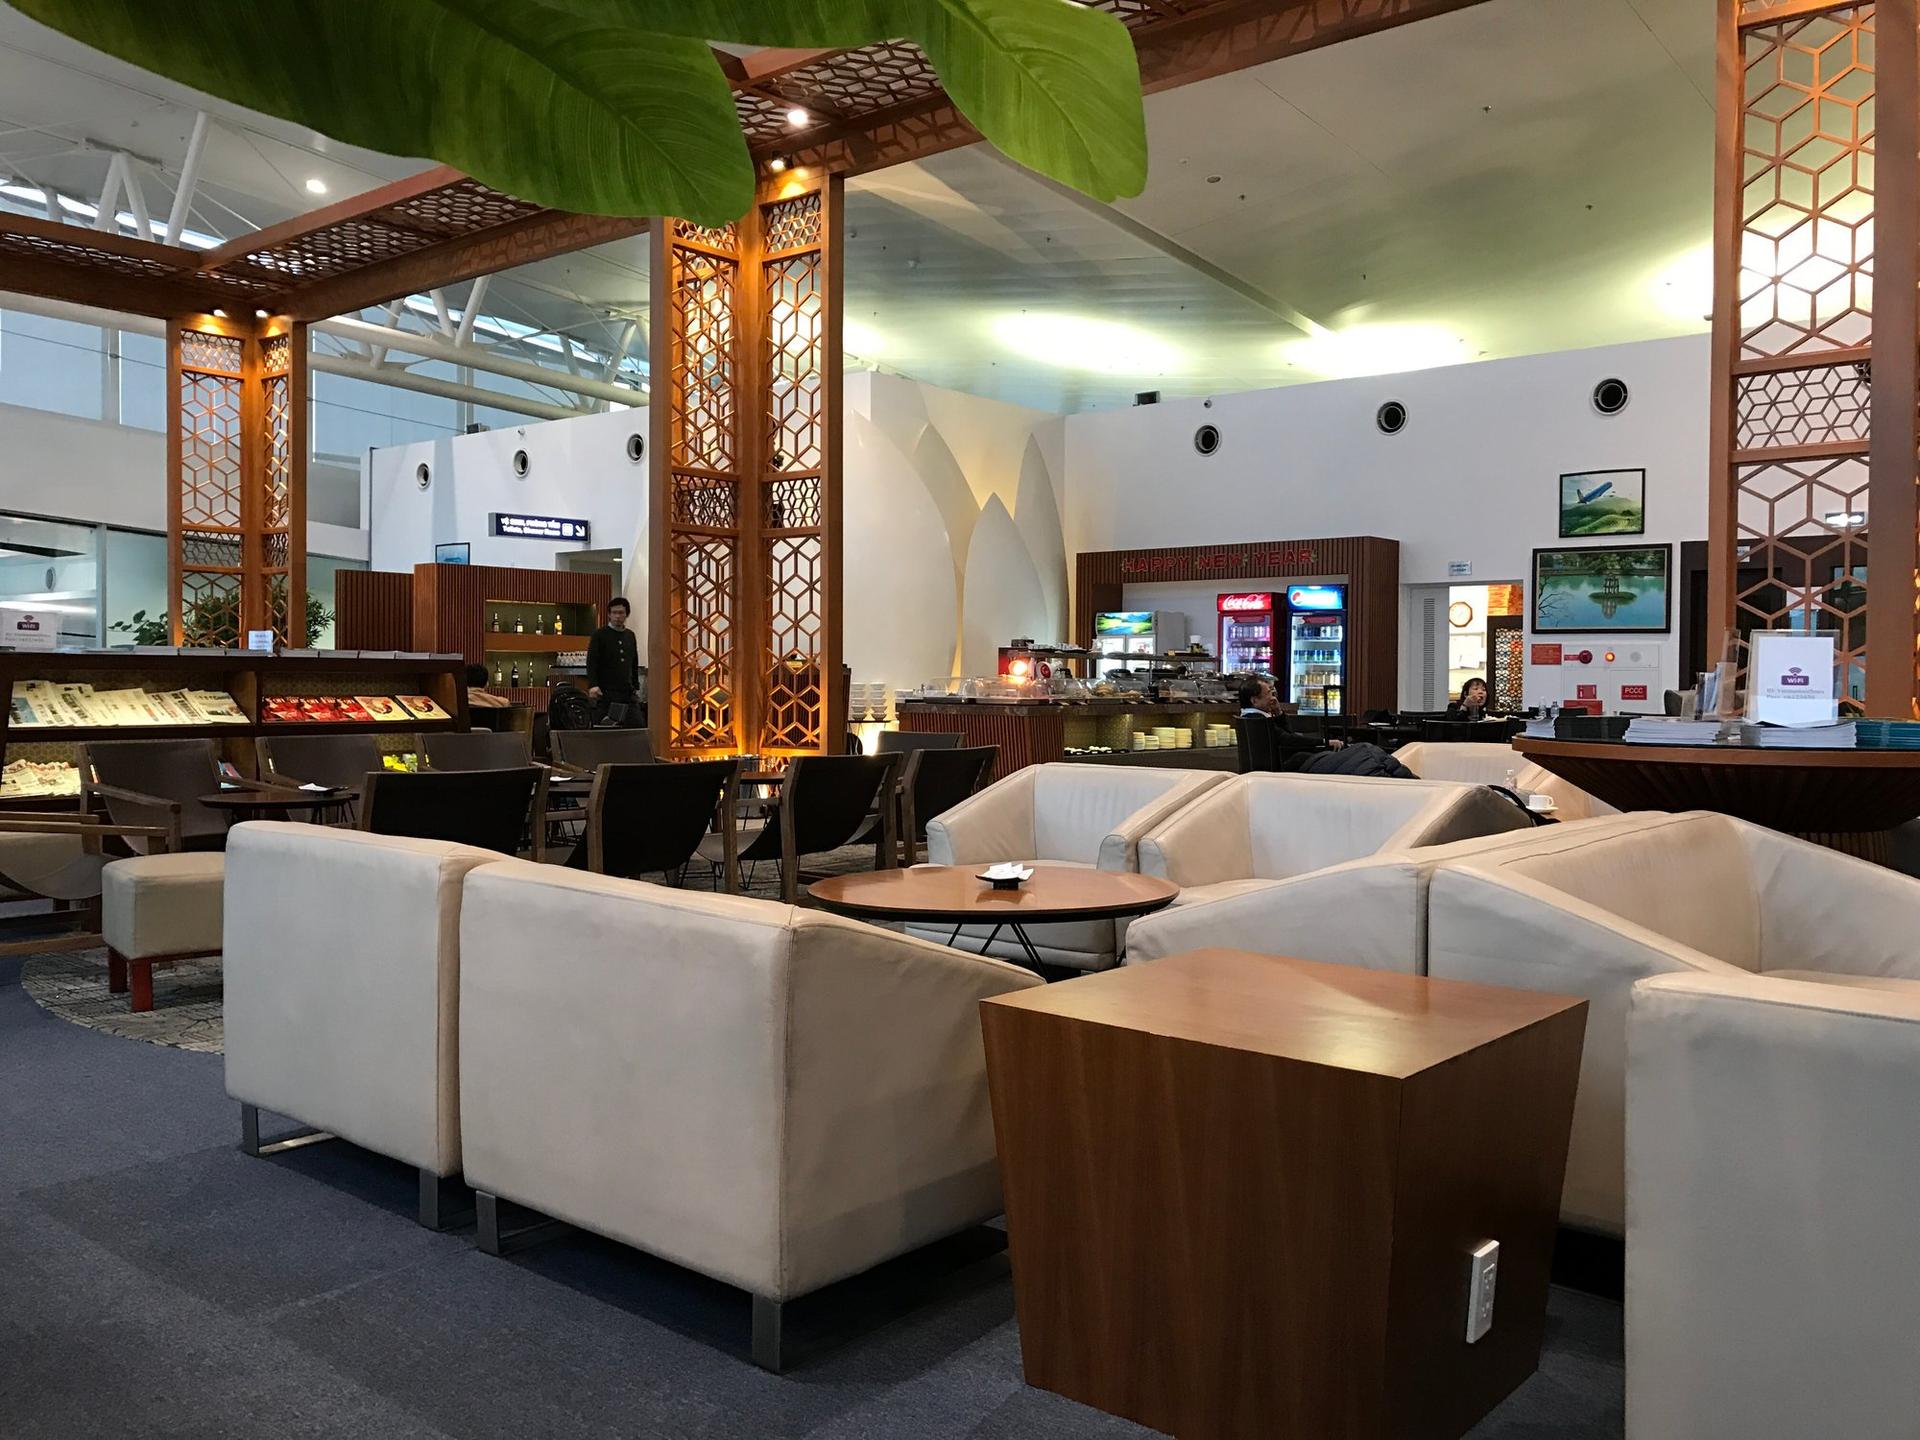 Vietnam Airlines Business Class Lounge image 4 of 16